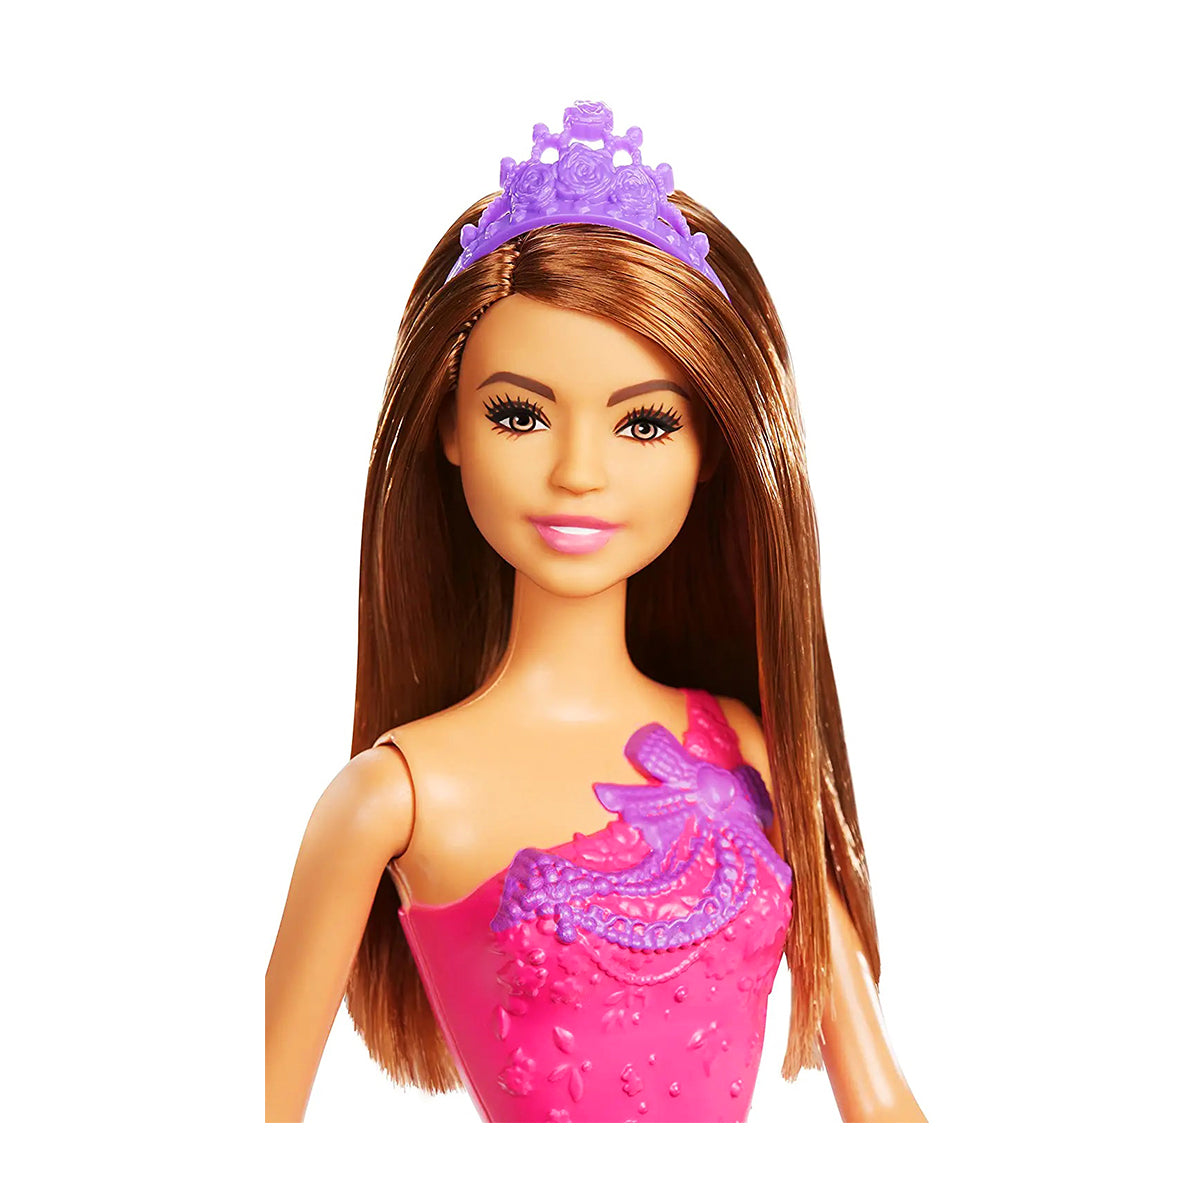 Barbie - Princess Doll (Styles Vary - One Supplied)